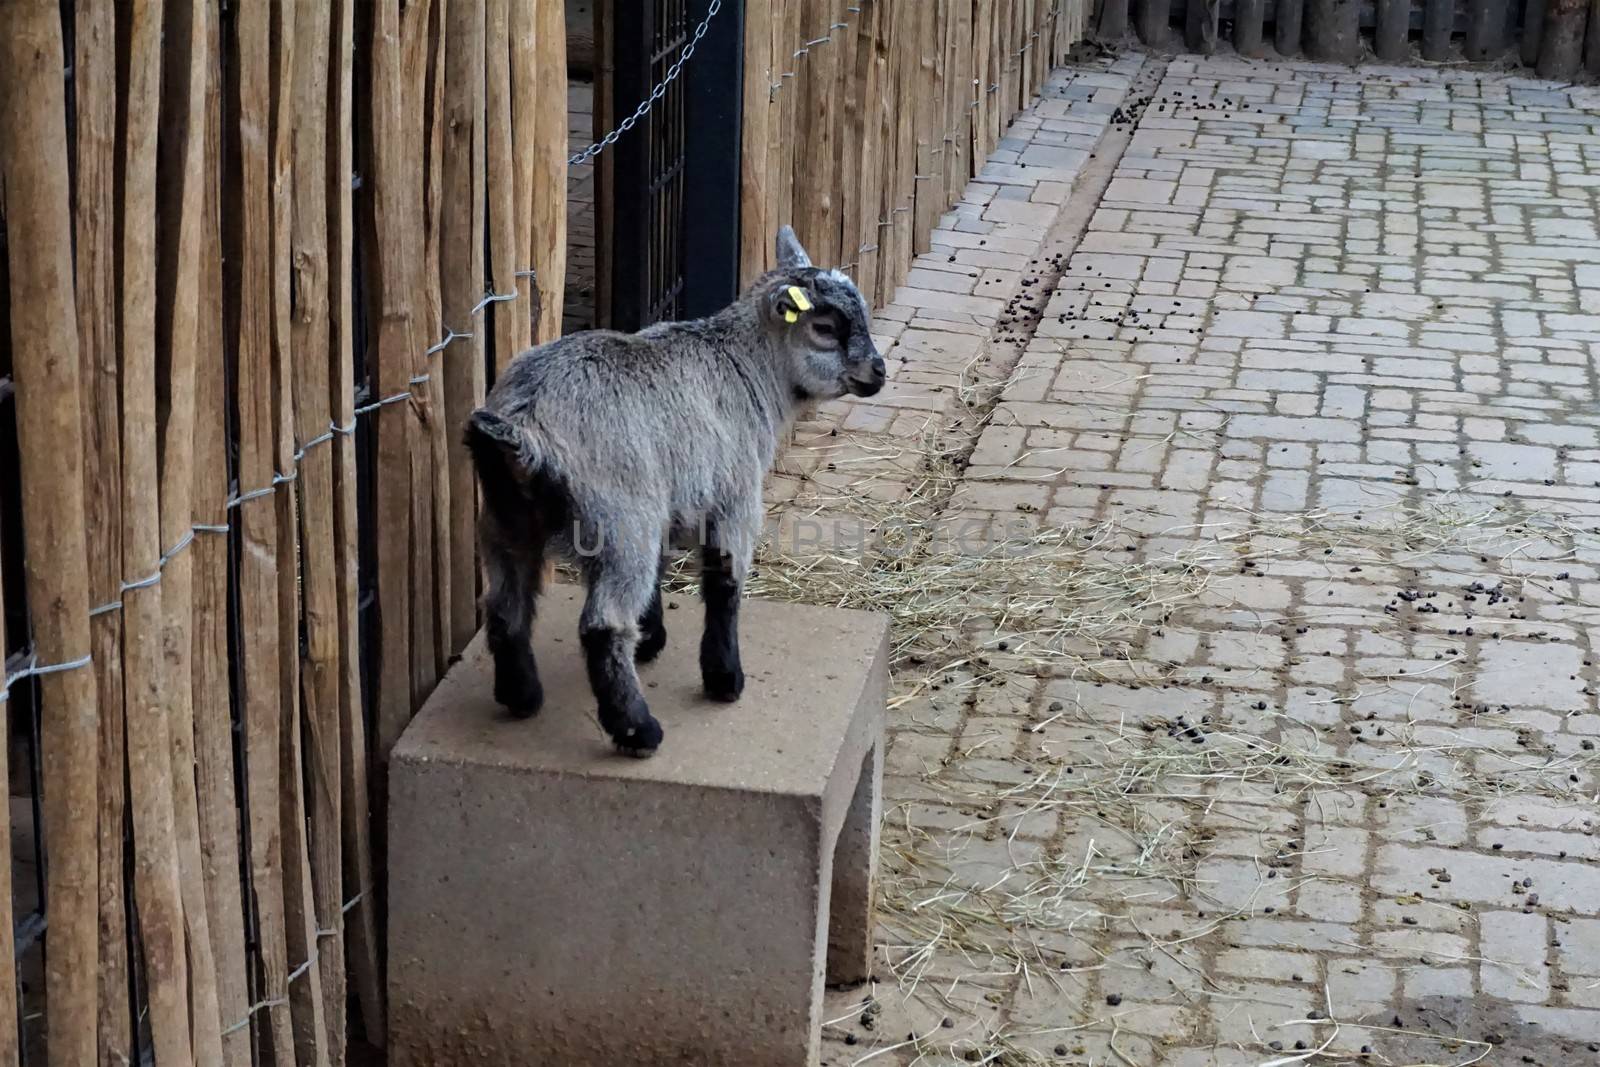 A cute baby goat standing on a stone bench